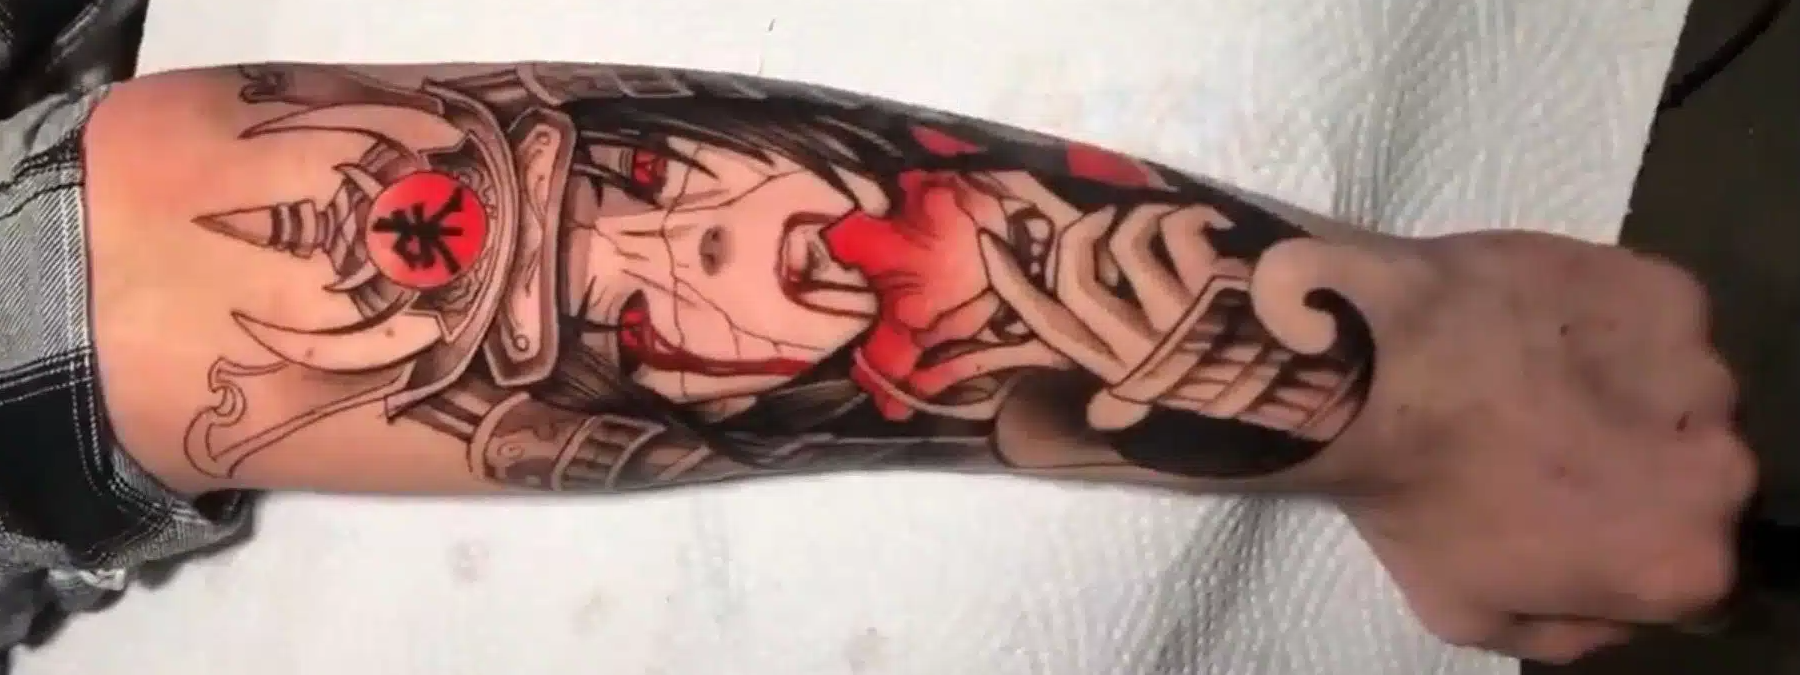 Draw japanese chinese or anime tattoo design by Silasjackson2 | Fiverr